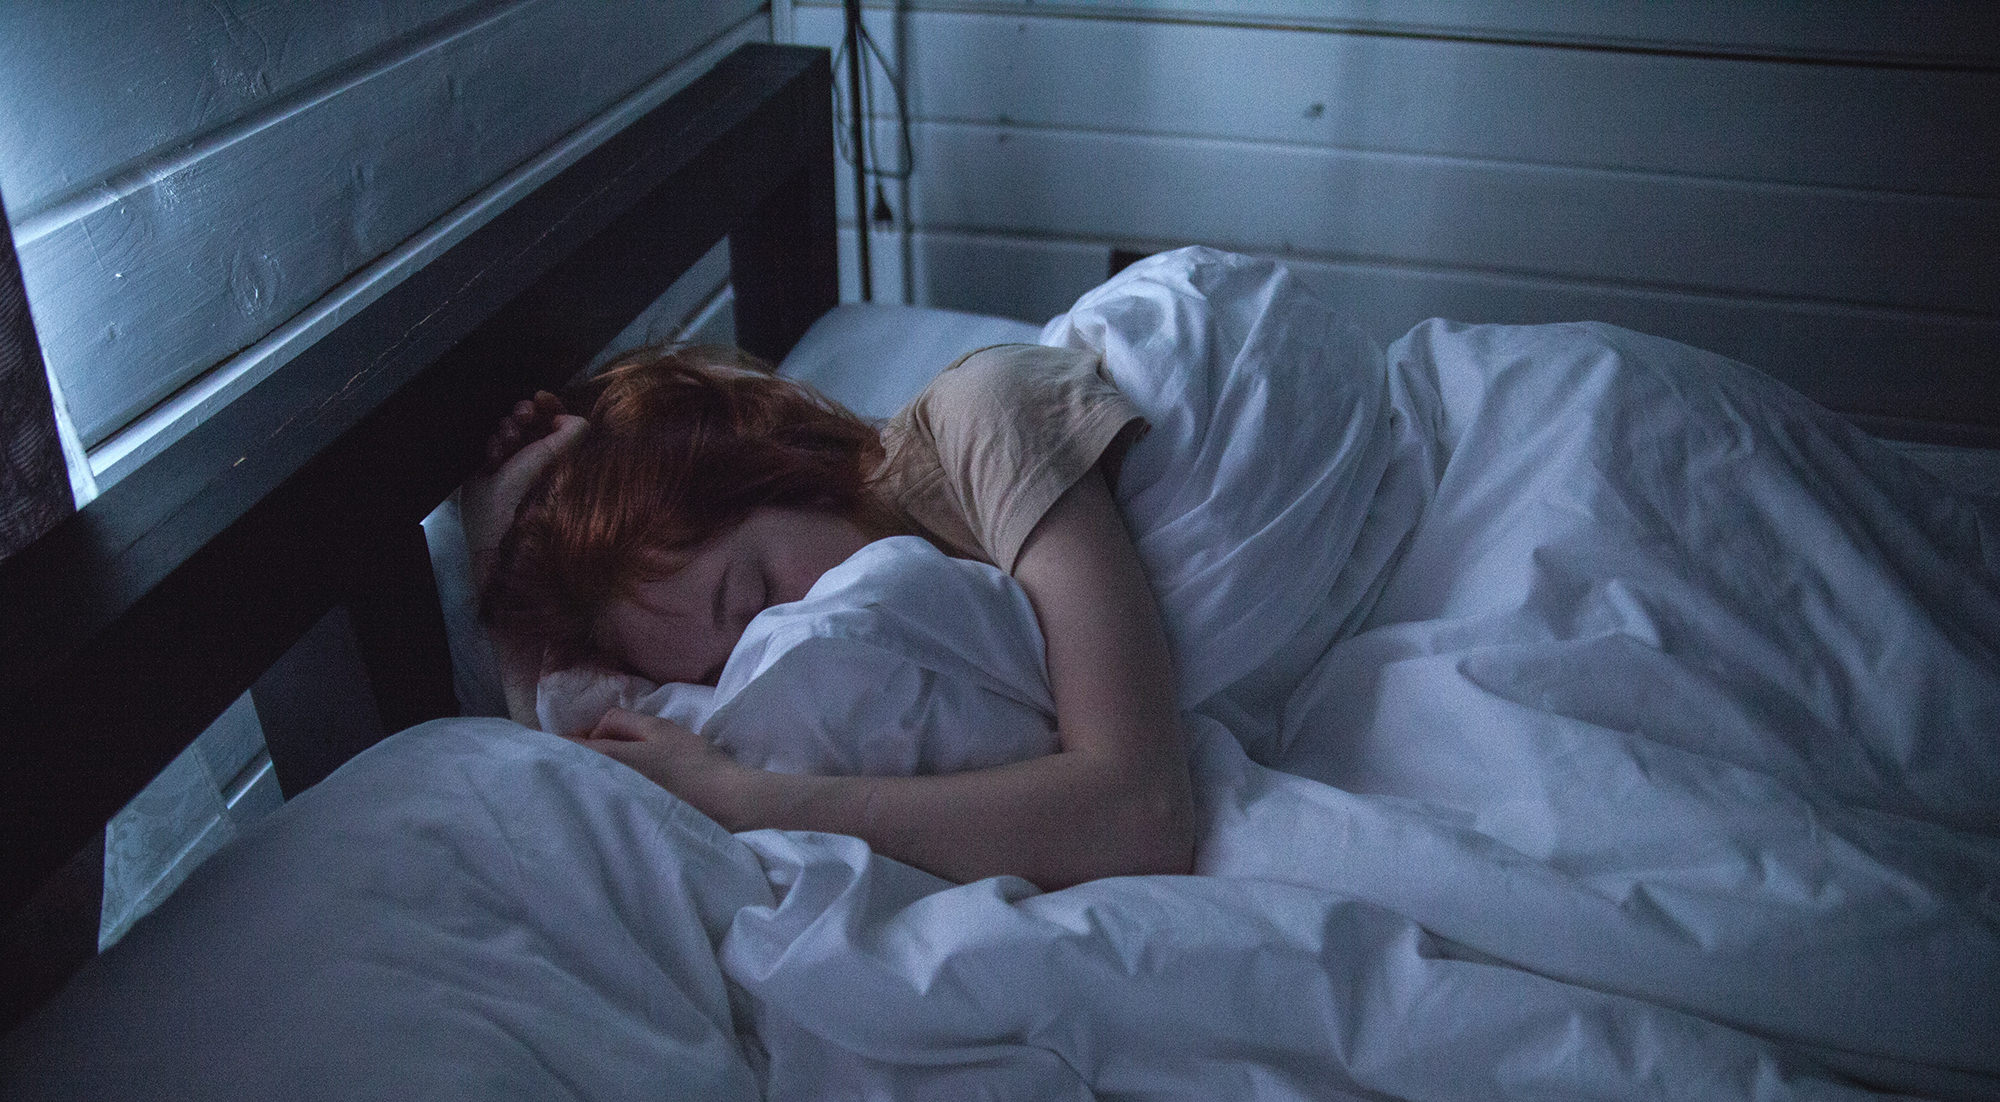 A person with red hair curled upin bed sleeping.